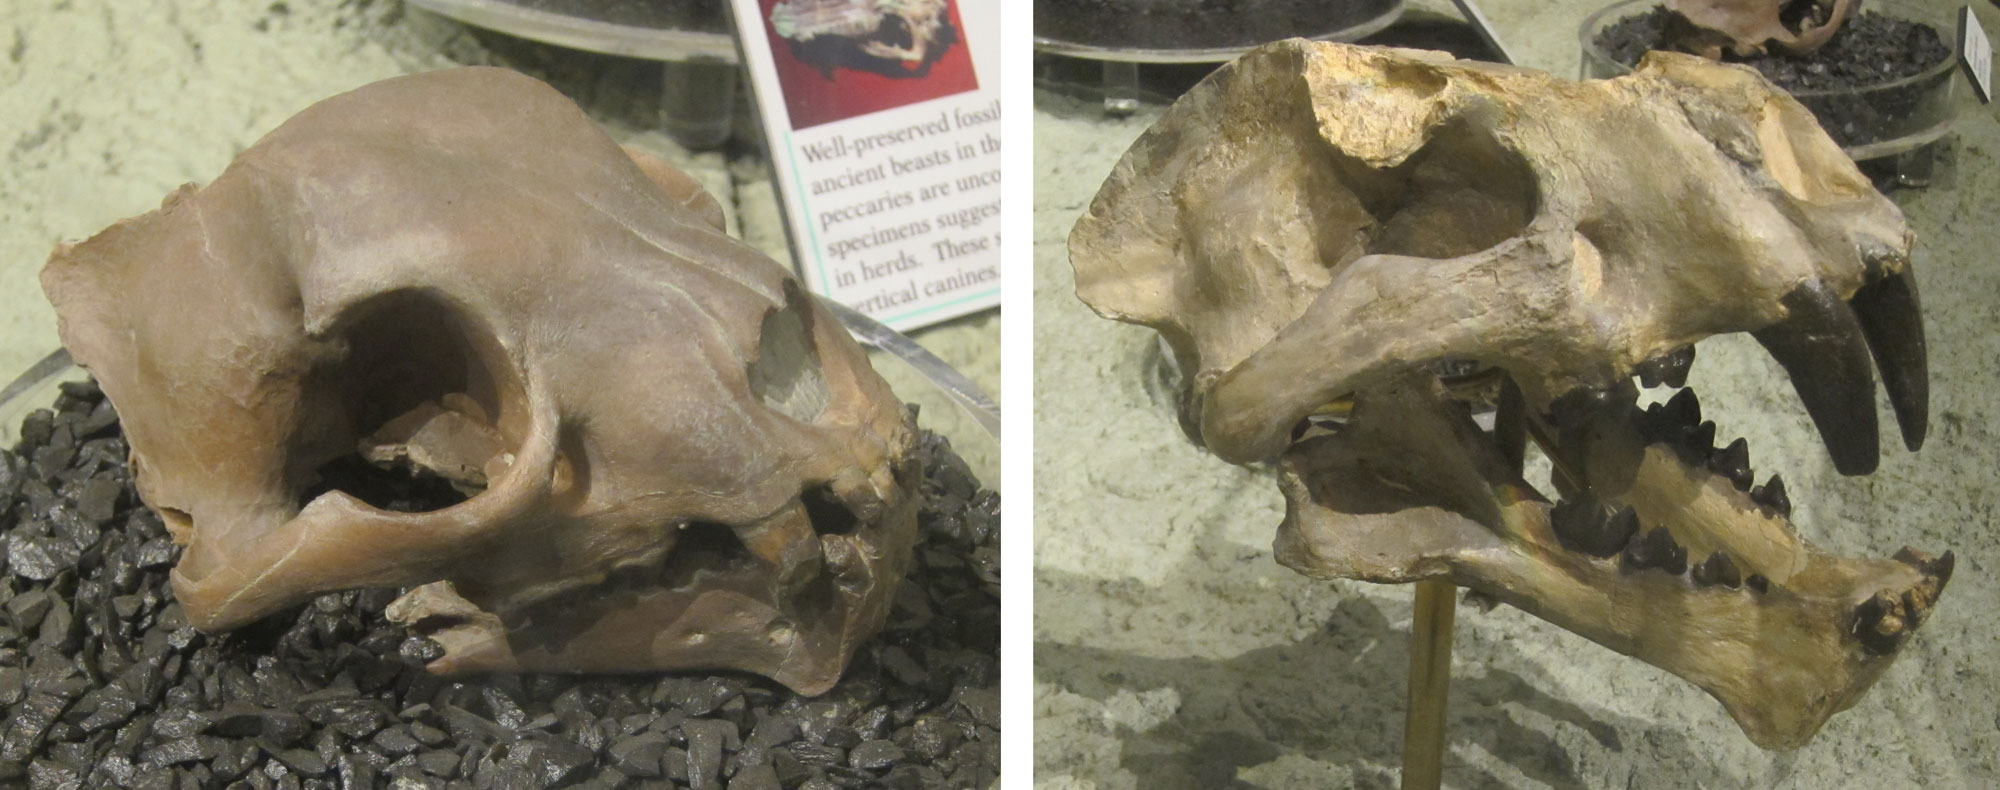 2-panel figure of photos of nimravid skulls from the Oligocene John Day Formation. Nimravids are an extinct group of cat-like animals. Panel 1: Small skull o of a dirk-toothed nimravid. Panel 2: Larger skull of the so-called John Day "tiger," which has saber-like canine teeth.